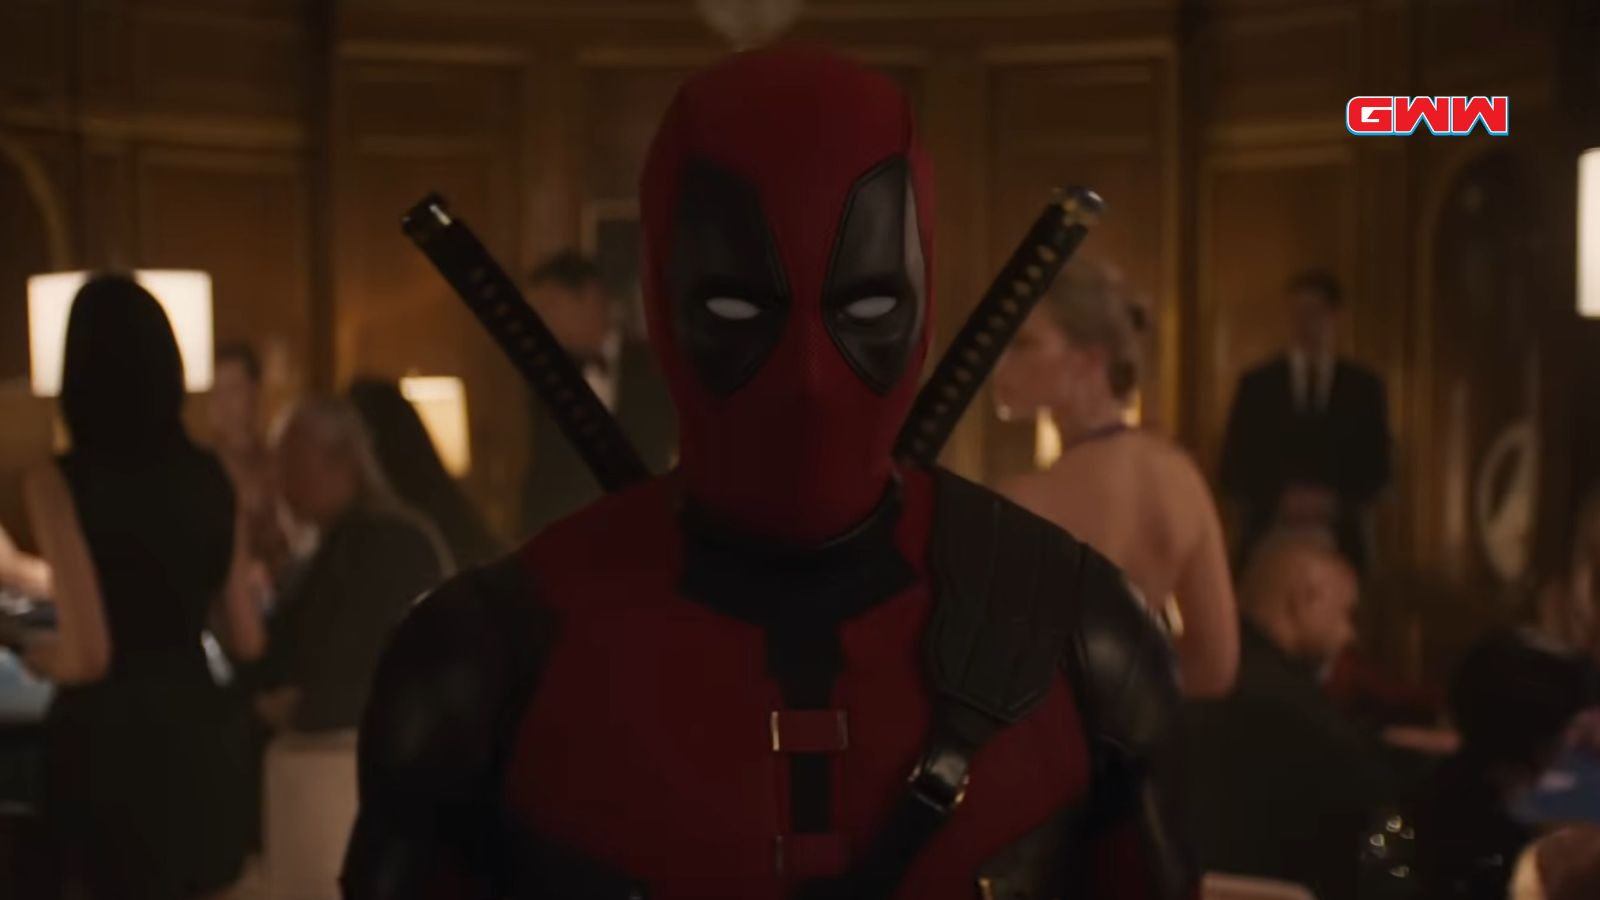 Image of Deadpool 3 trailer with the famous anti-hero in a dynamic pose